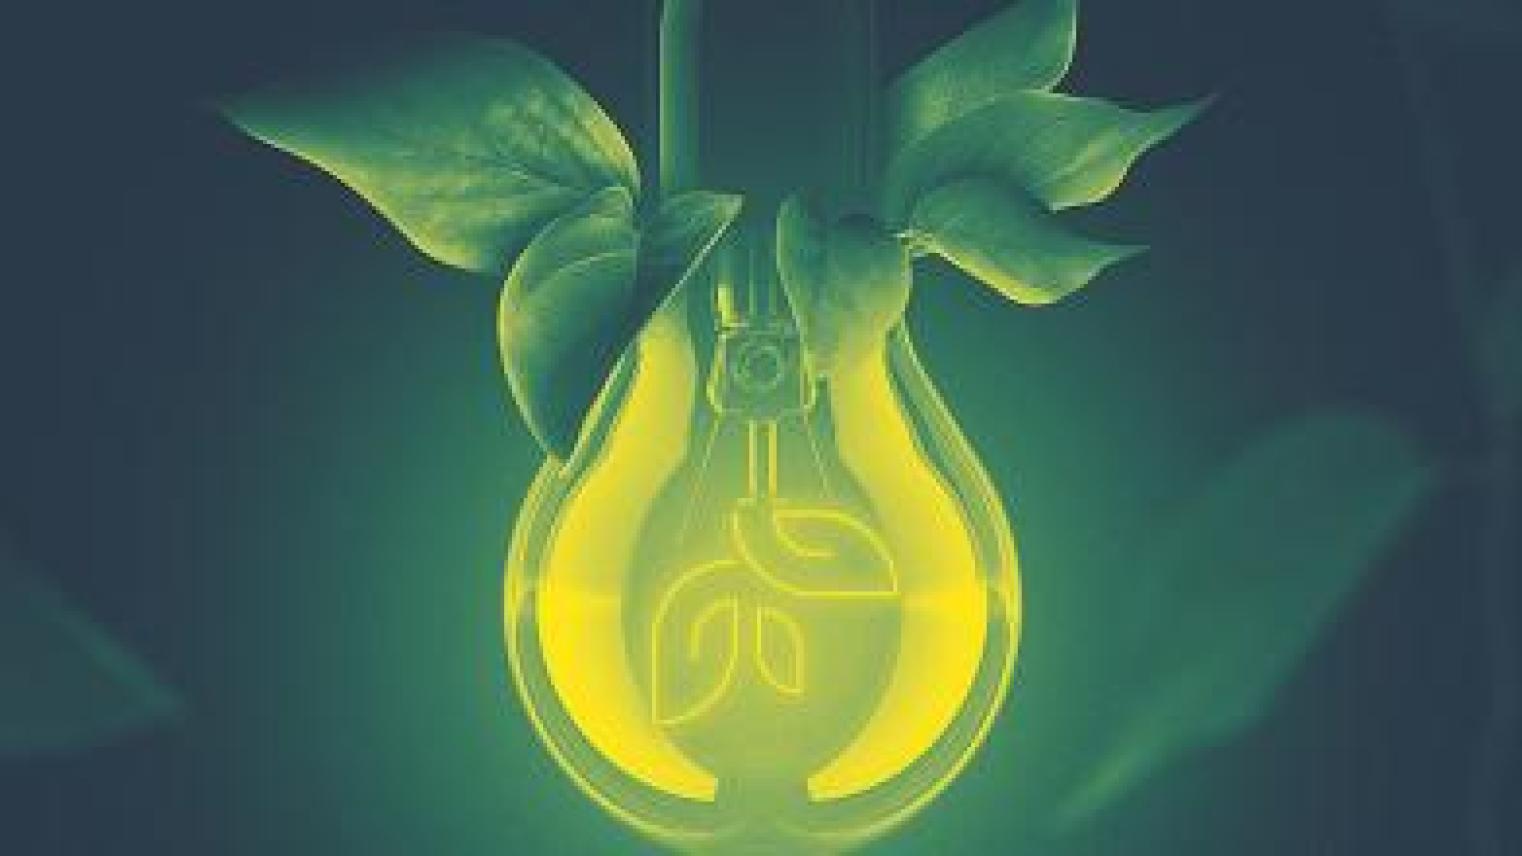 Image: Conversations 3, Opportunities. Leafy Lightbulb